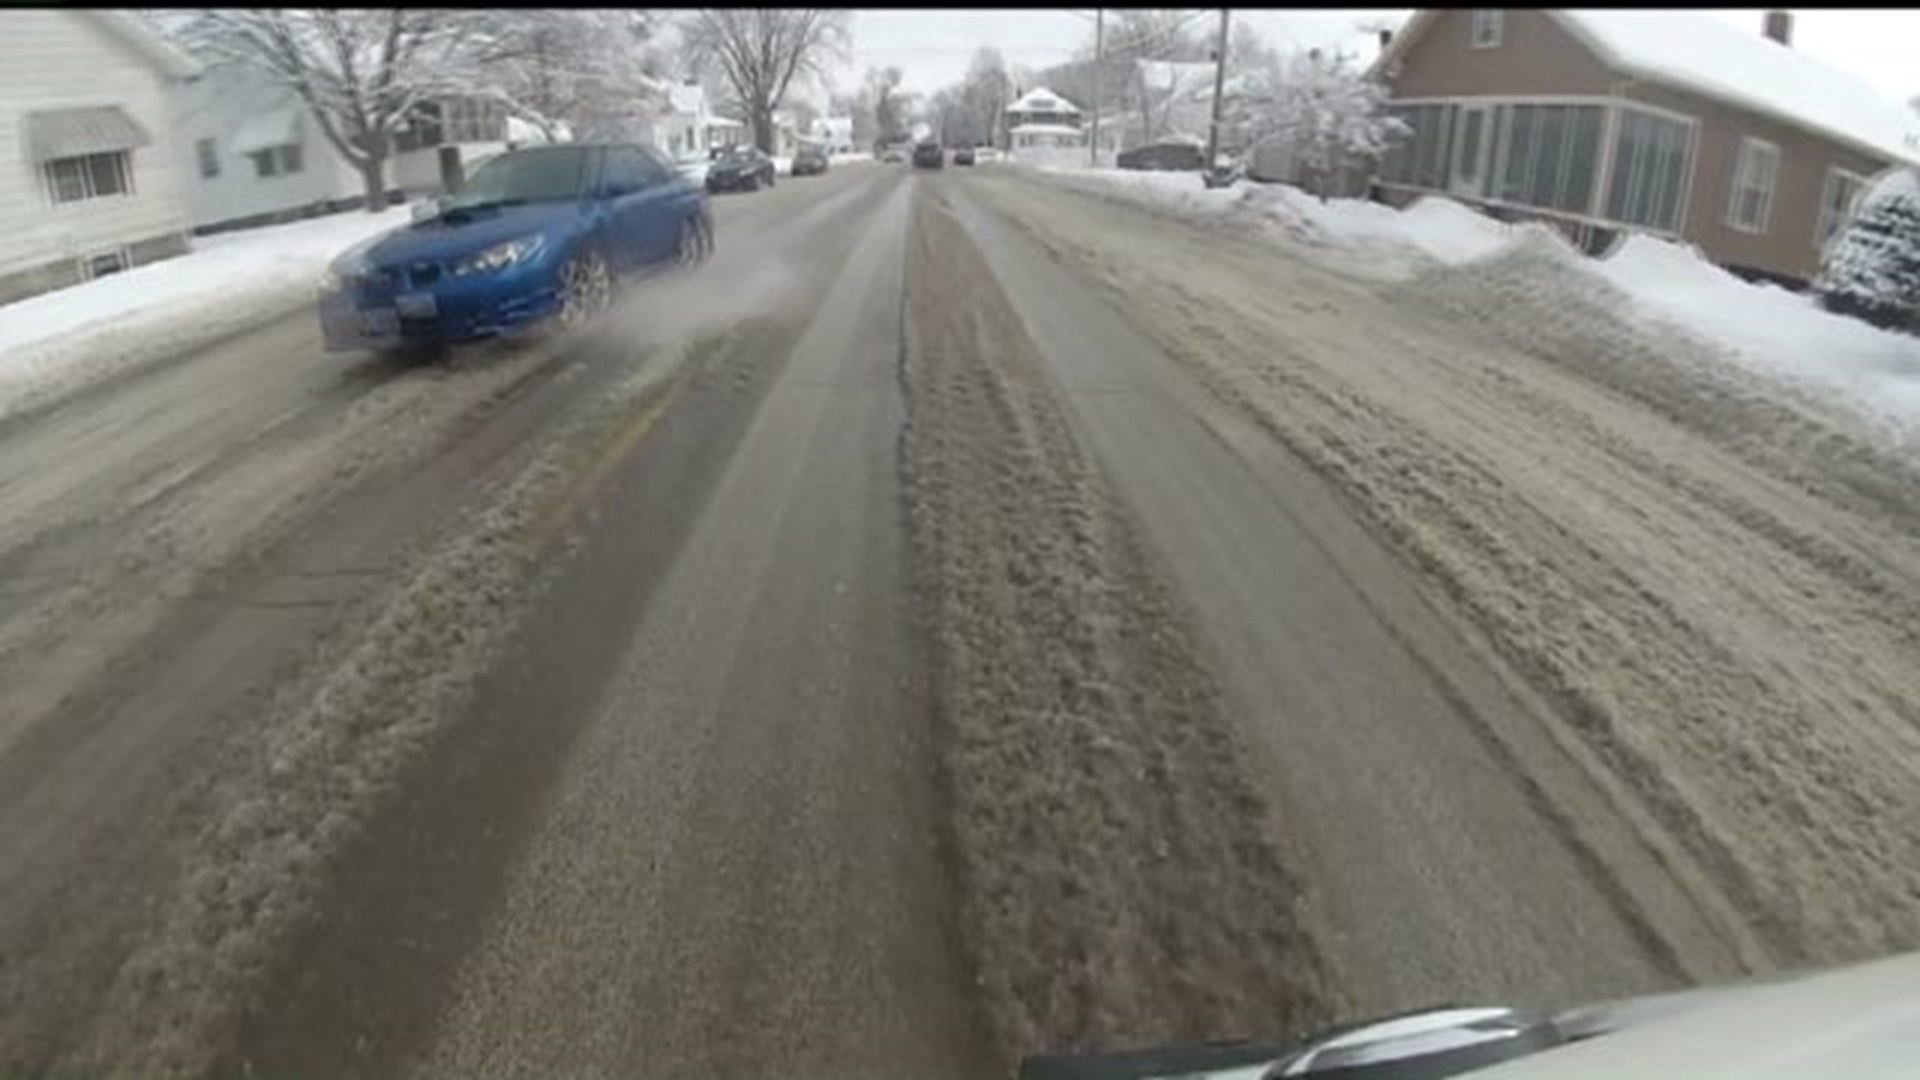 Mayor apologizes after Moline slammed with complaints over snow removal